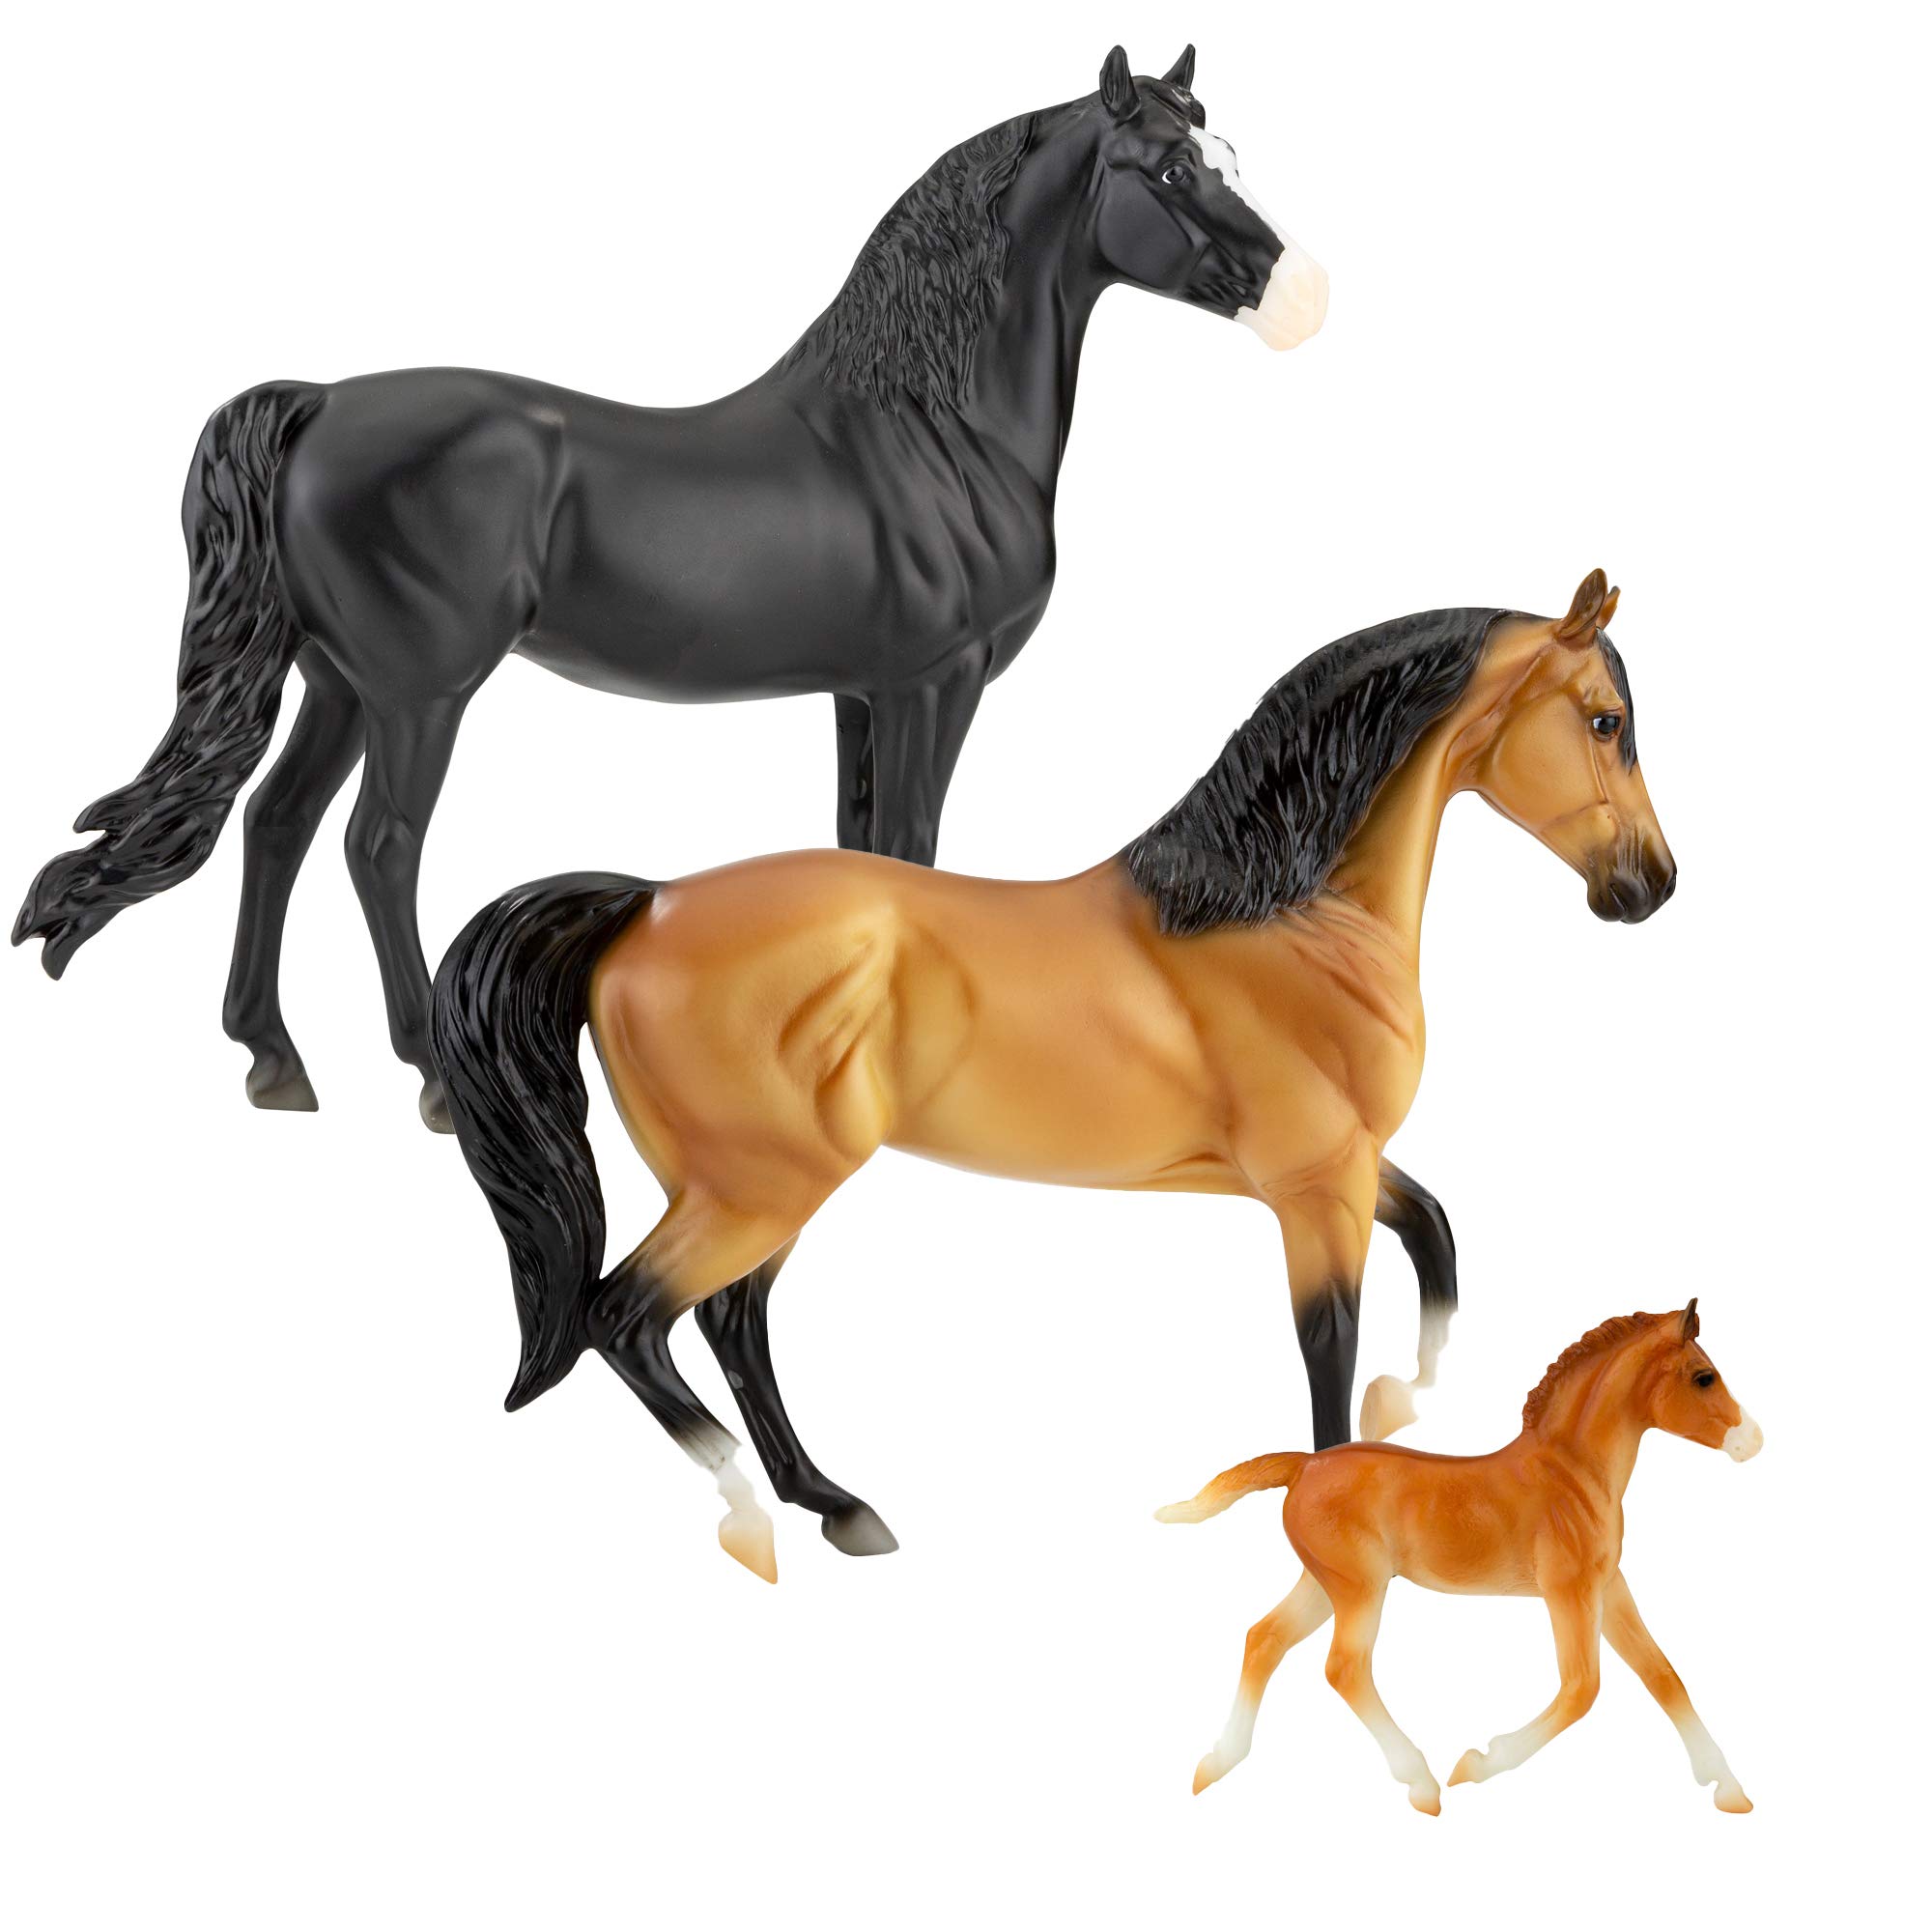 Breyer Horses Freedom Series Spanish Mustang Family 3 Horse Set Horse Toy 9.75 x 7 112 Scale Horse Toy Model